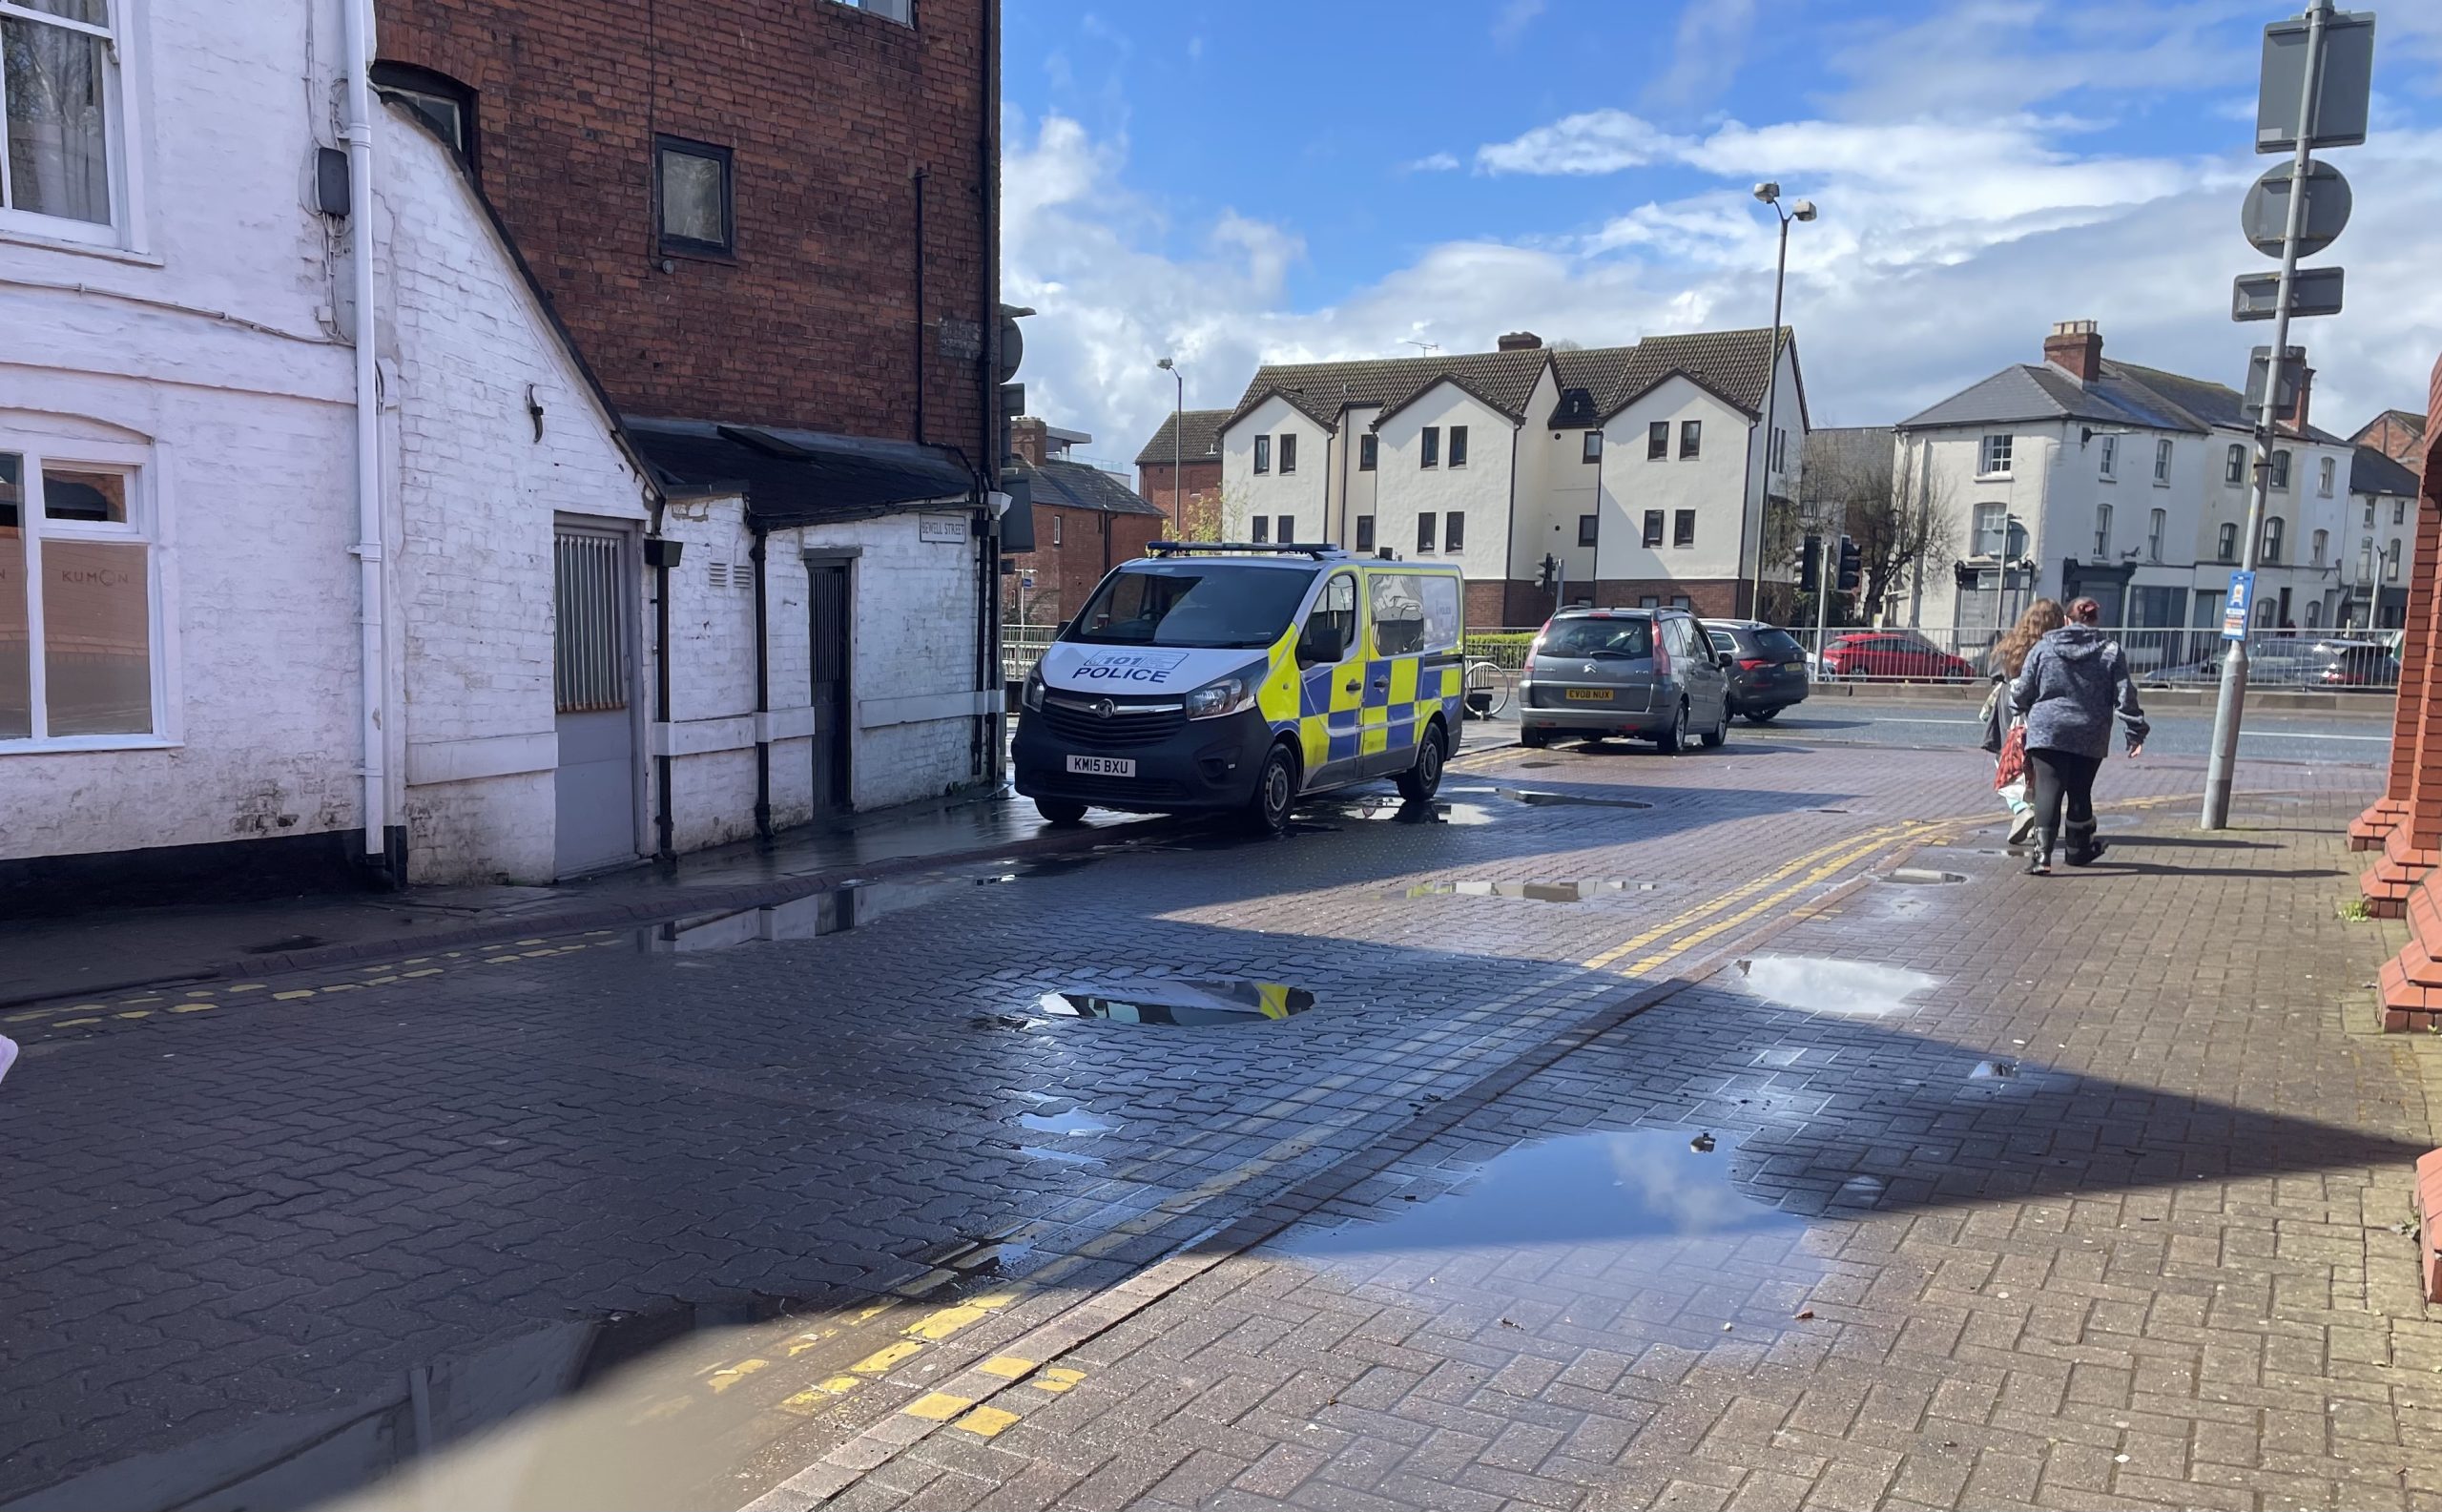 NEWS | Police responding to an incident in the Eign Gate area of Hereford city centre